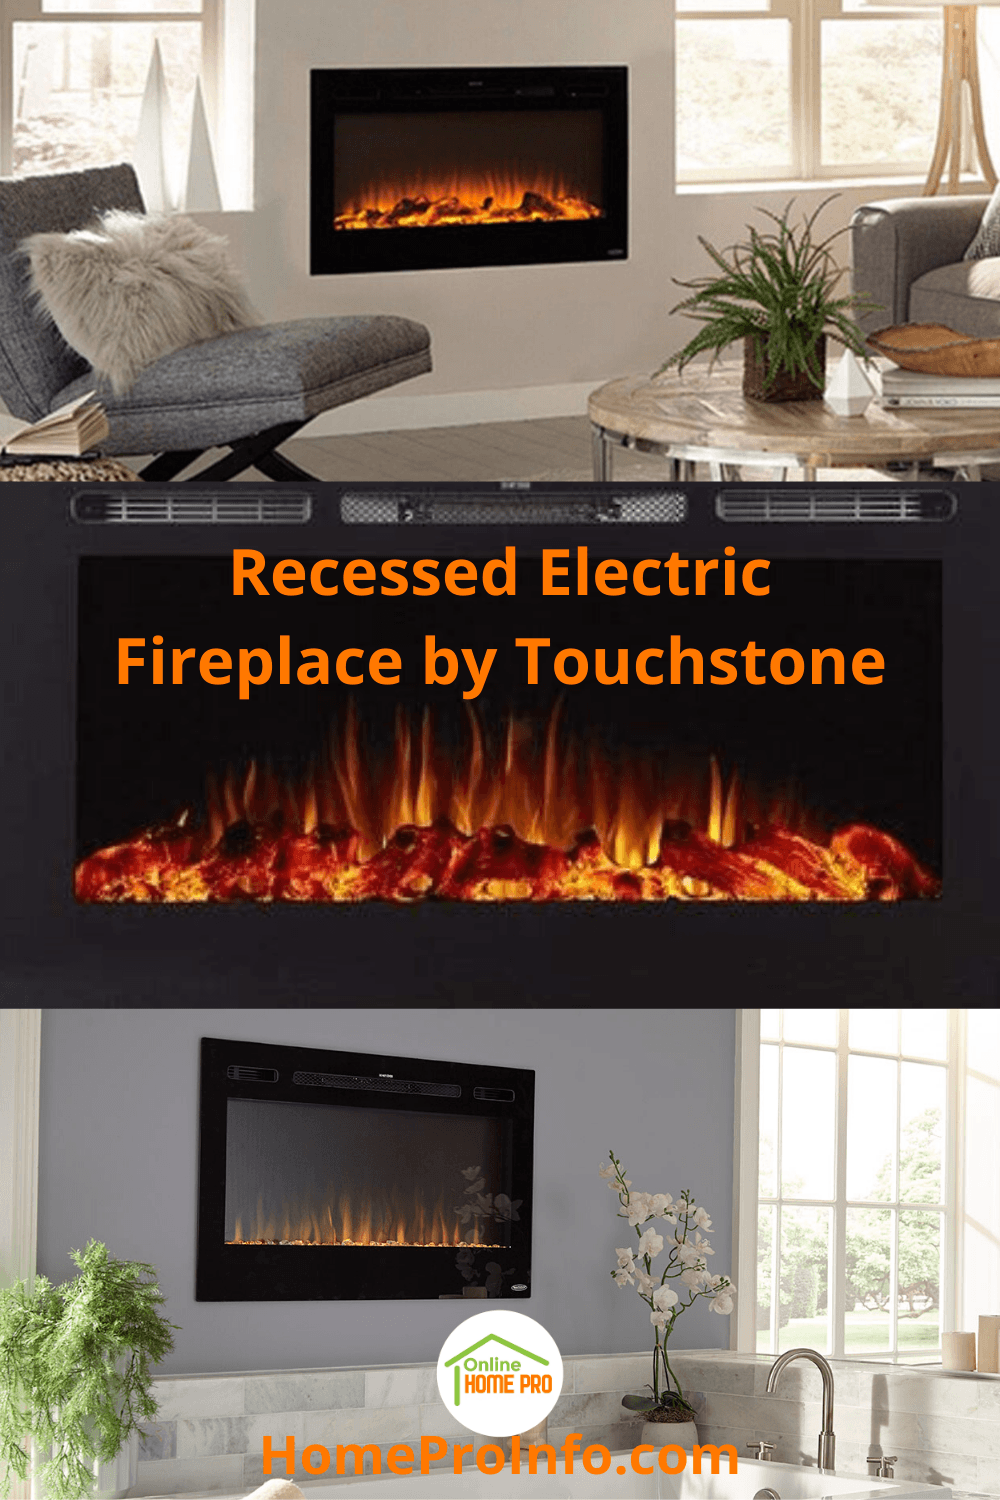 ecessed electric fireplace by Touchstone